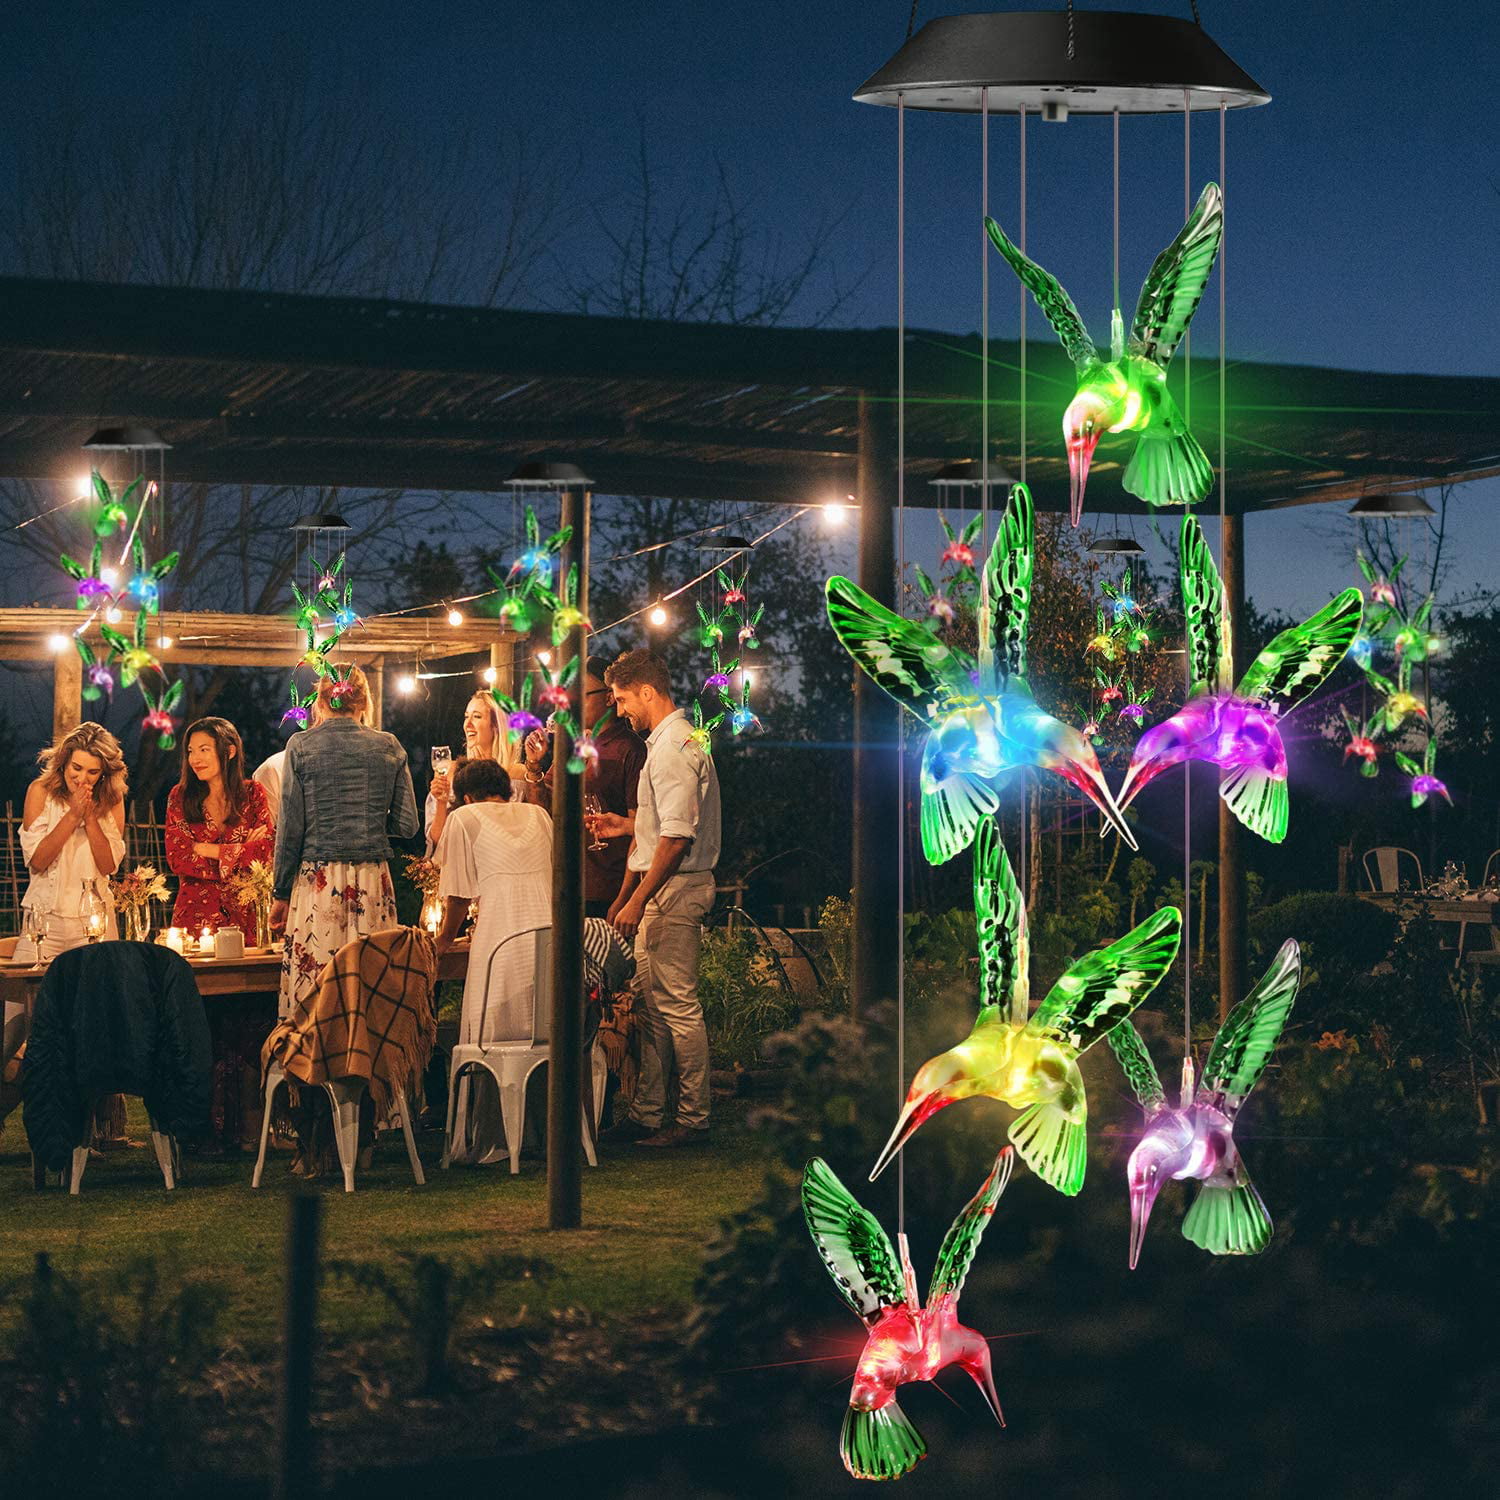 Waterproof Solar Wind Chimes for Outdoor Garden Patio Yard Decoration Lyhope Solar Wind Chime Lights Color Changing Led Mobile Hummingbird Solar Lights 